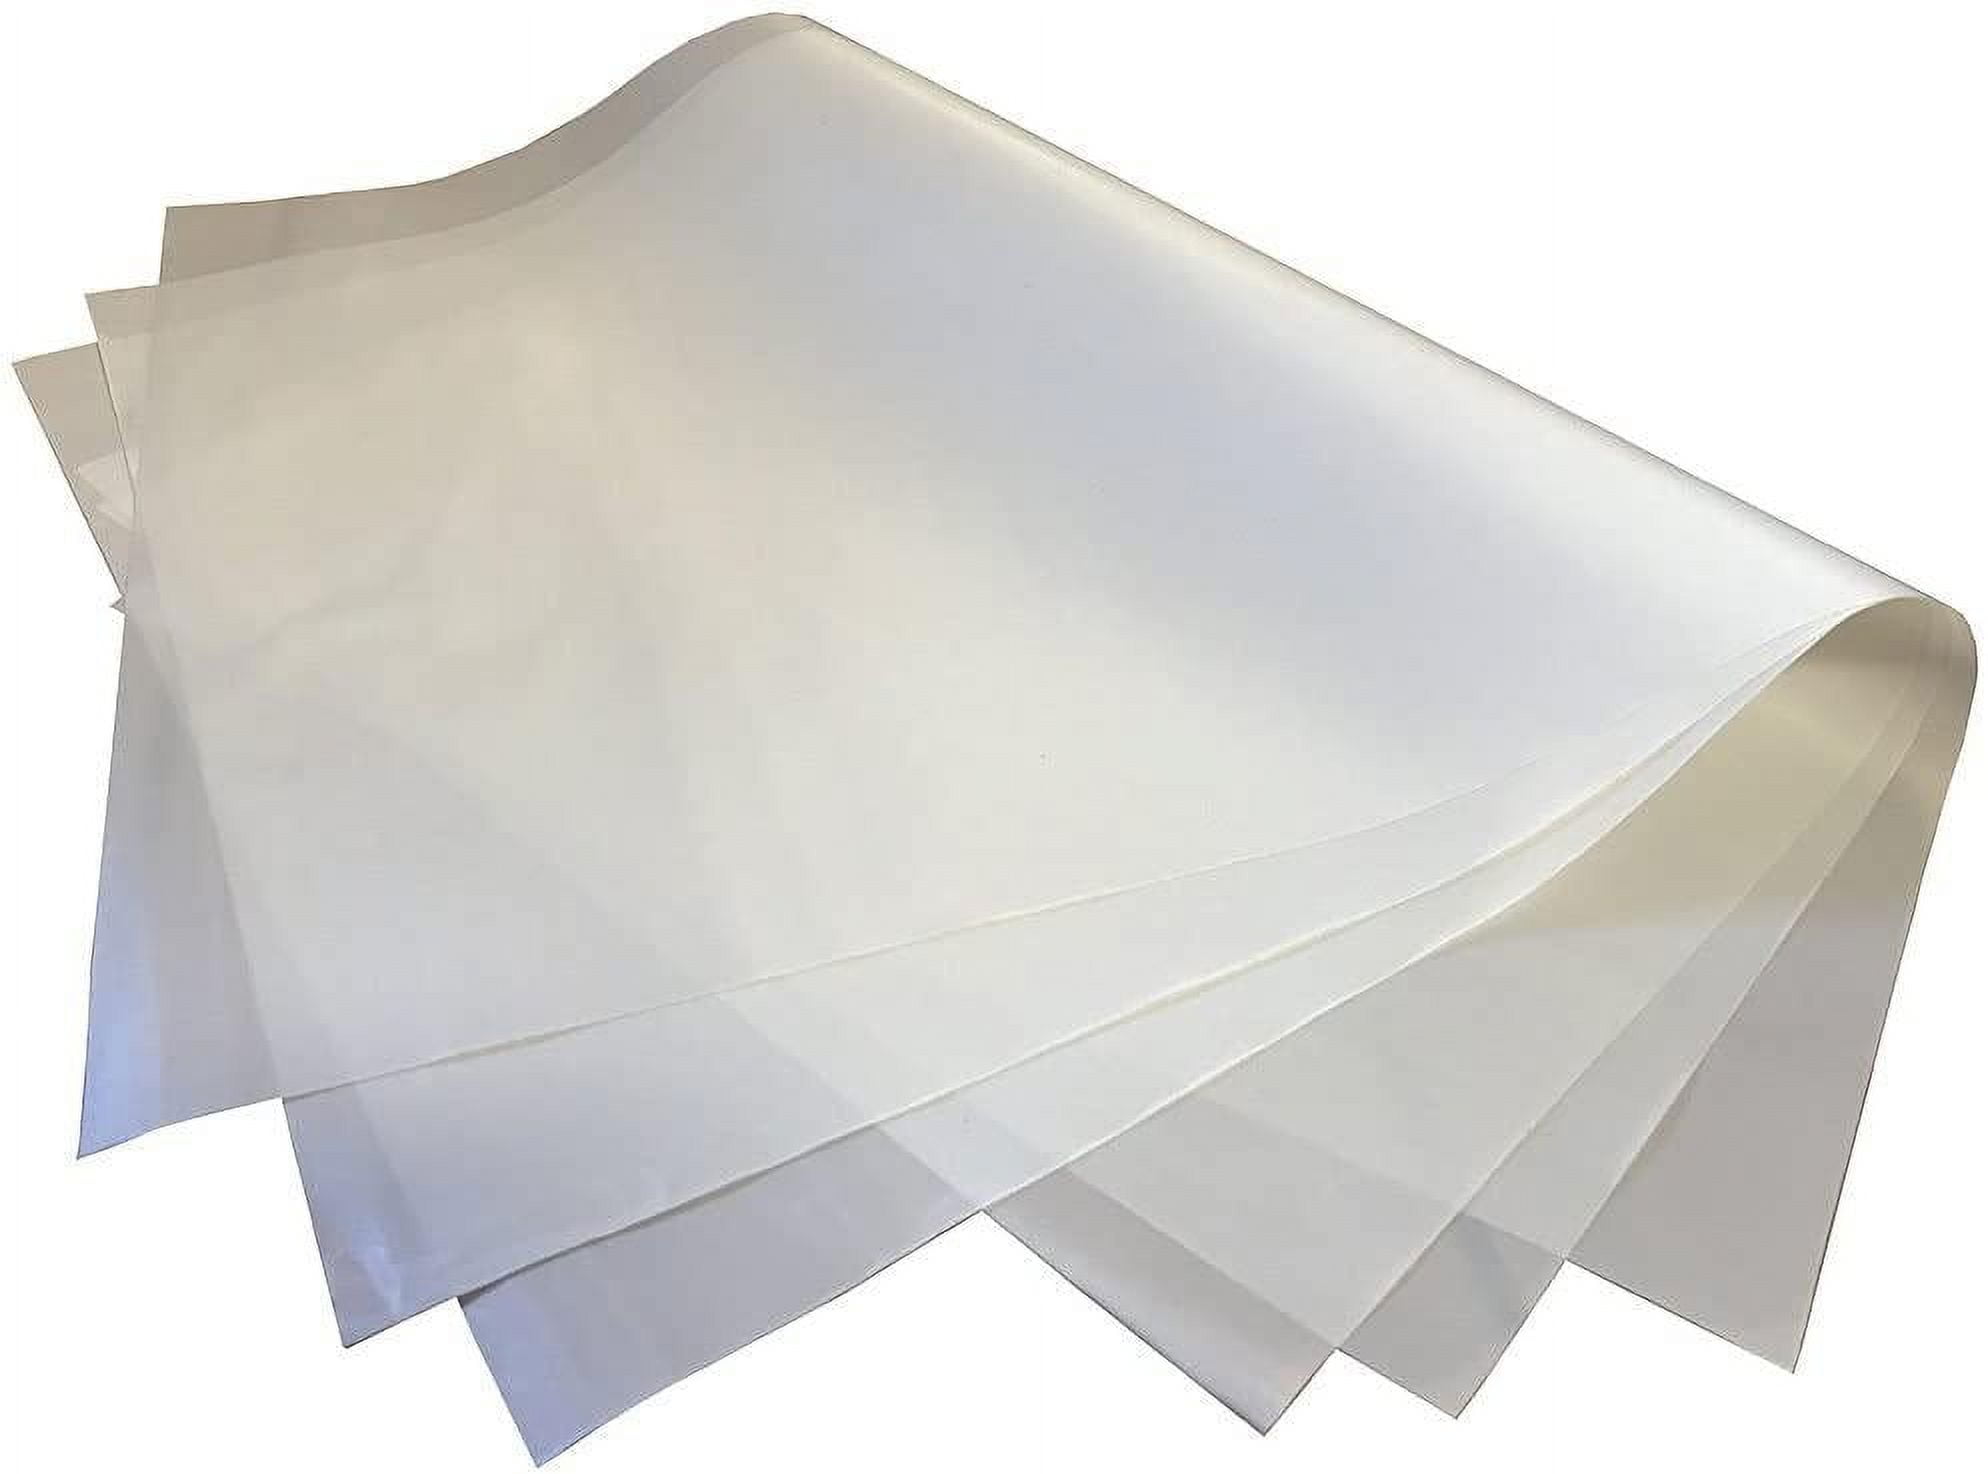  Teflon Sheet for 16x16 Heat Press Transfer Sheet 5 MIL Premium  : Other Products : Office Products